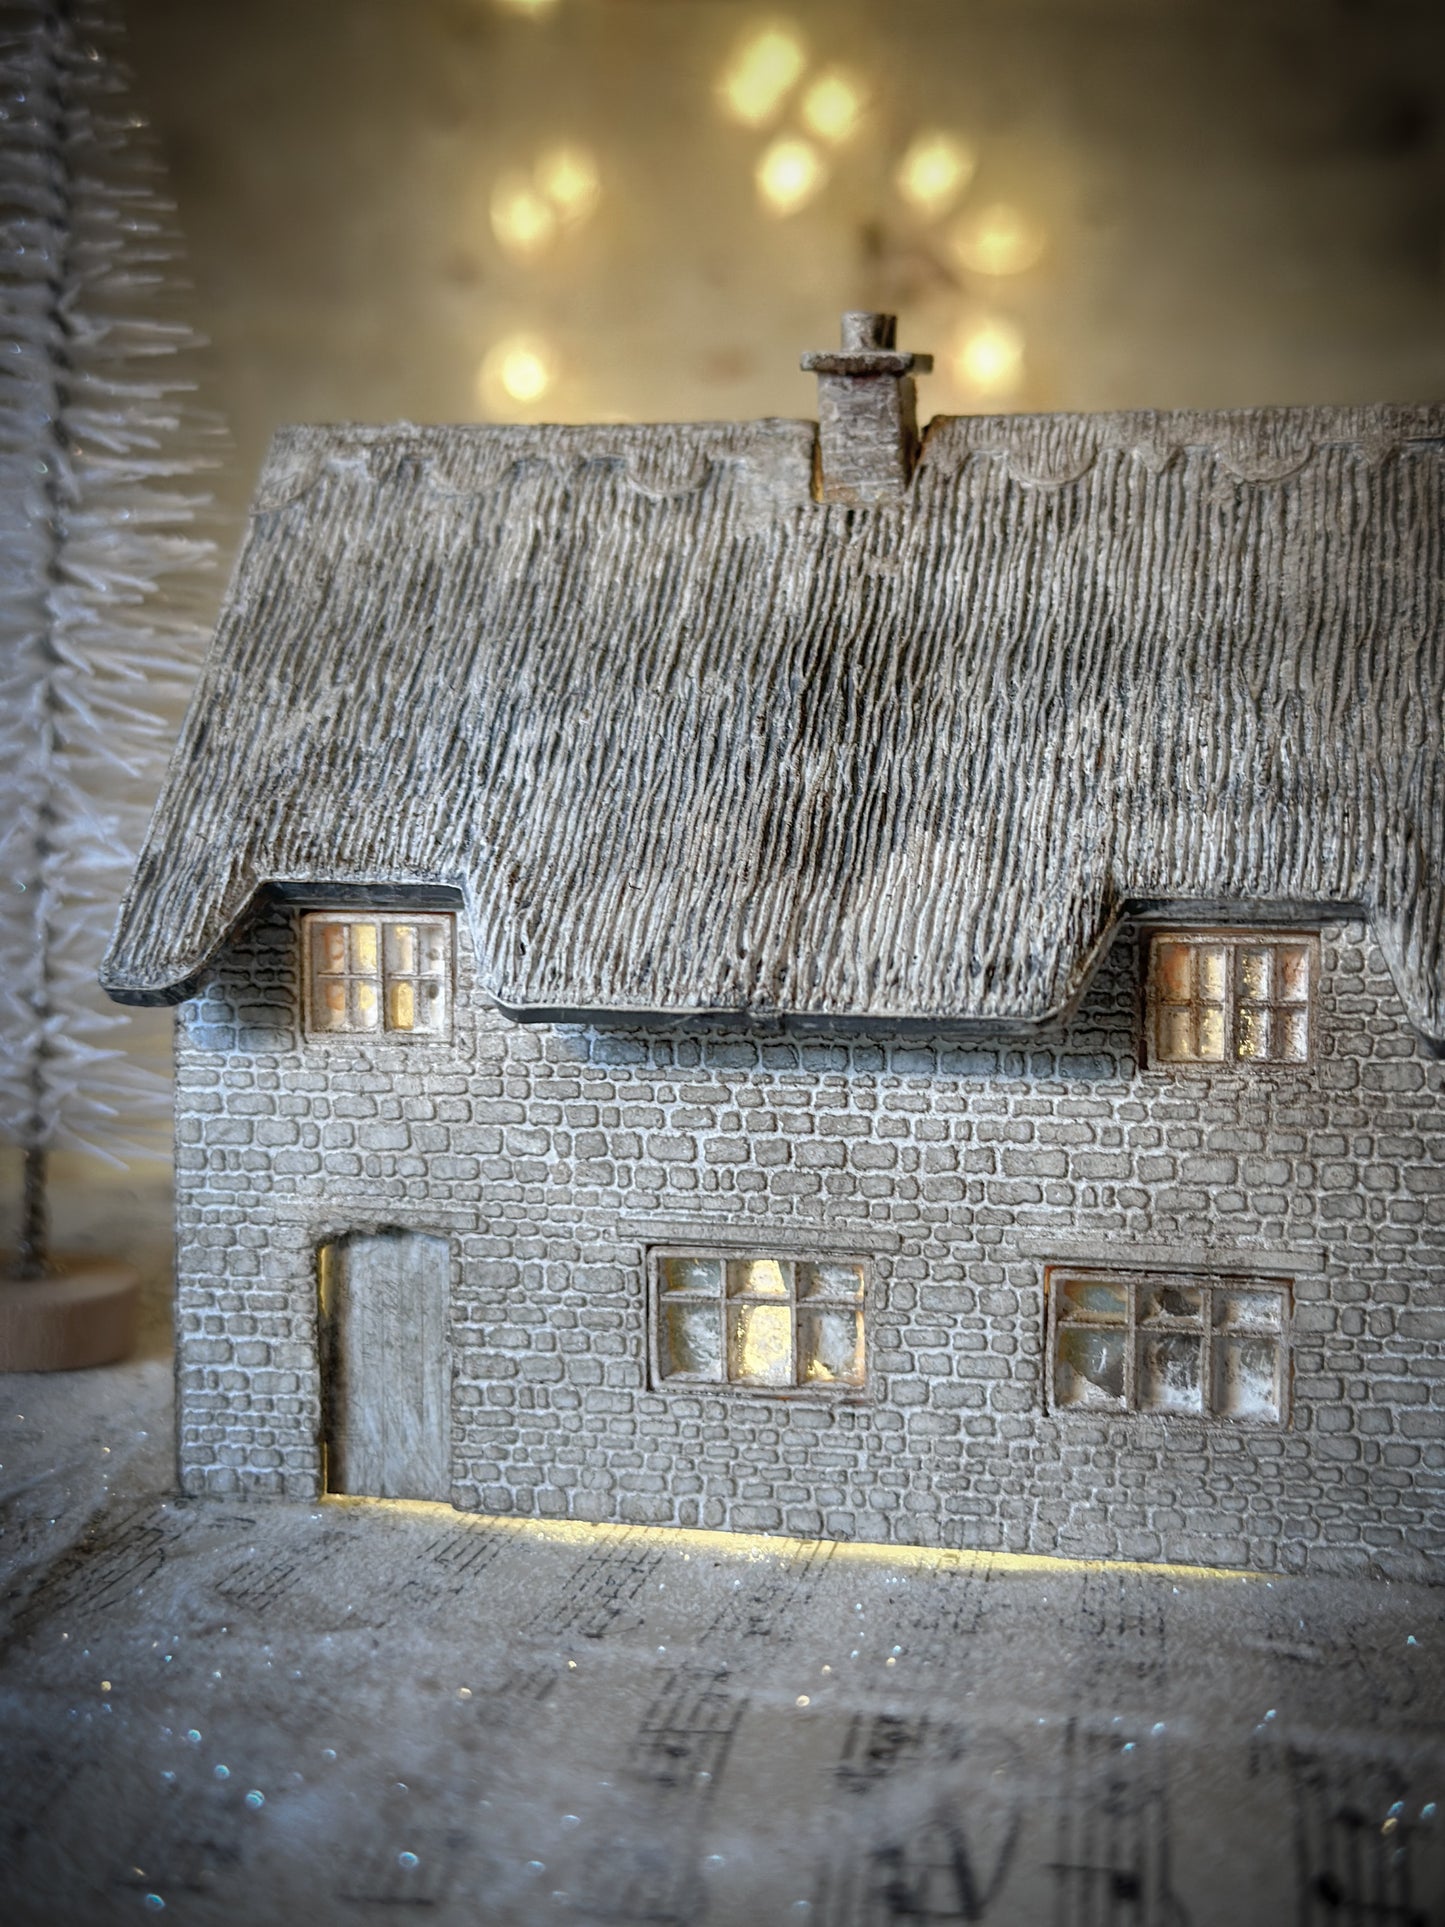 A reworked 1950’s model German Putz thatched cottage